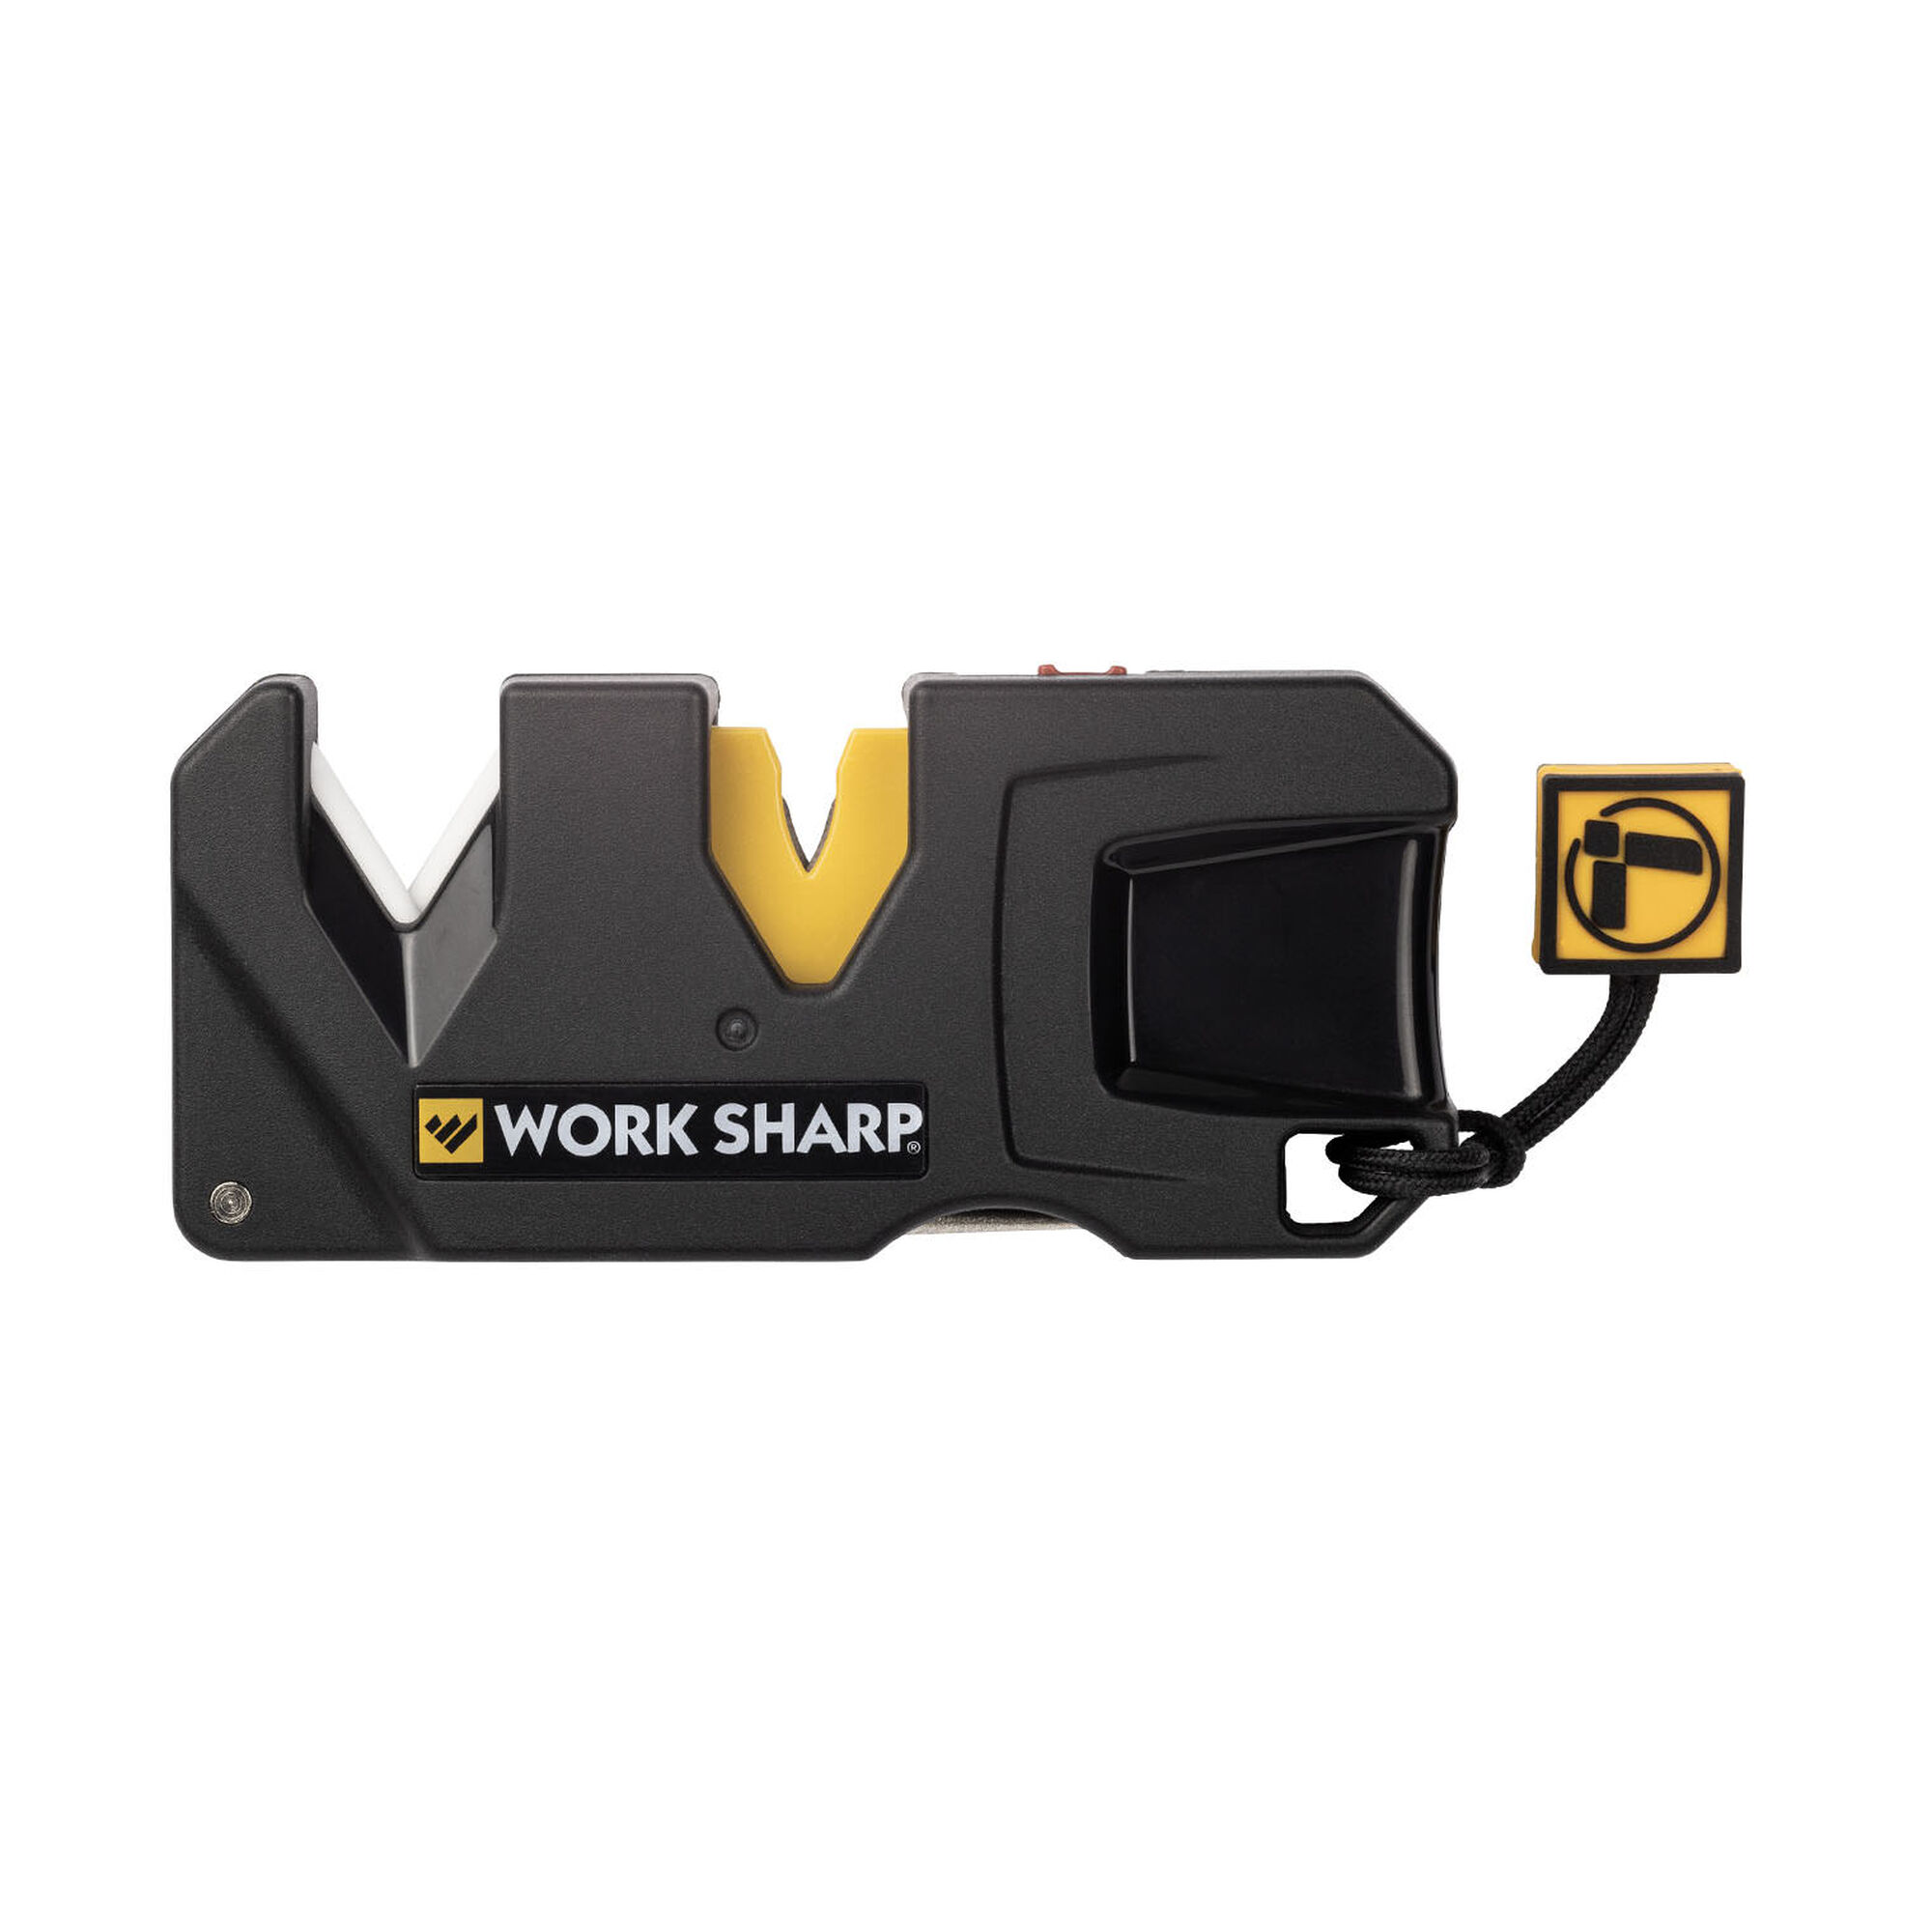  Work Sharp Guided Field Sharpener, Compact Travel Hunting Knife  Sharpener Tool : Sports & Outdoors